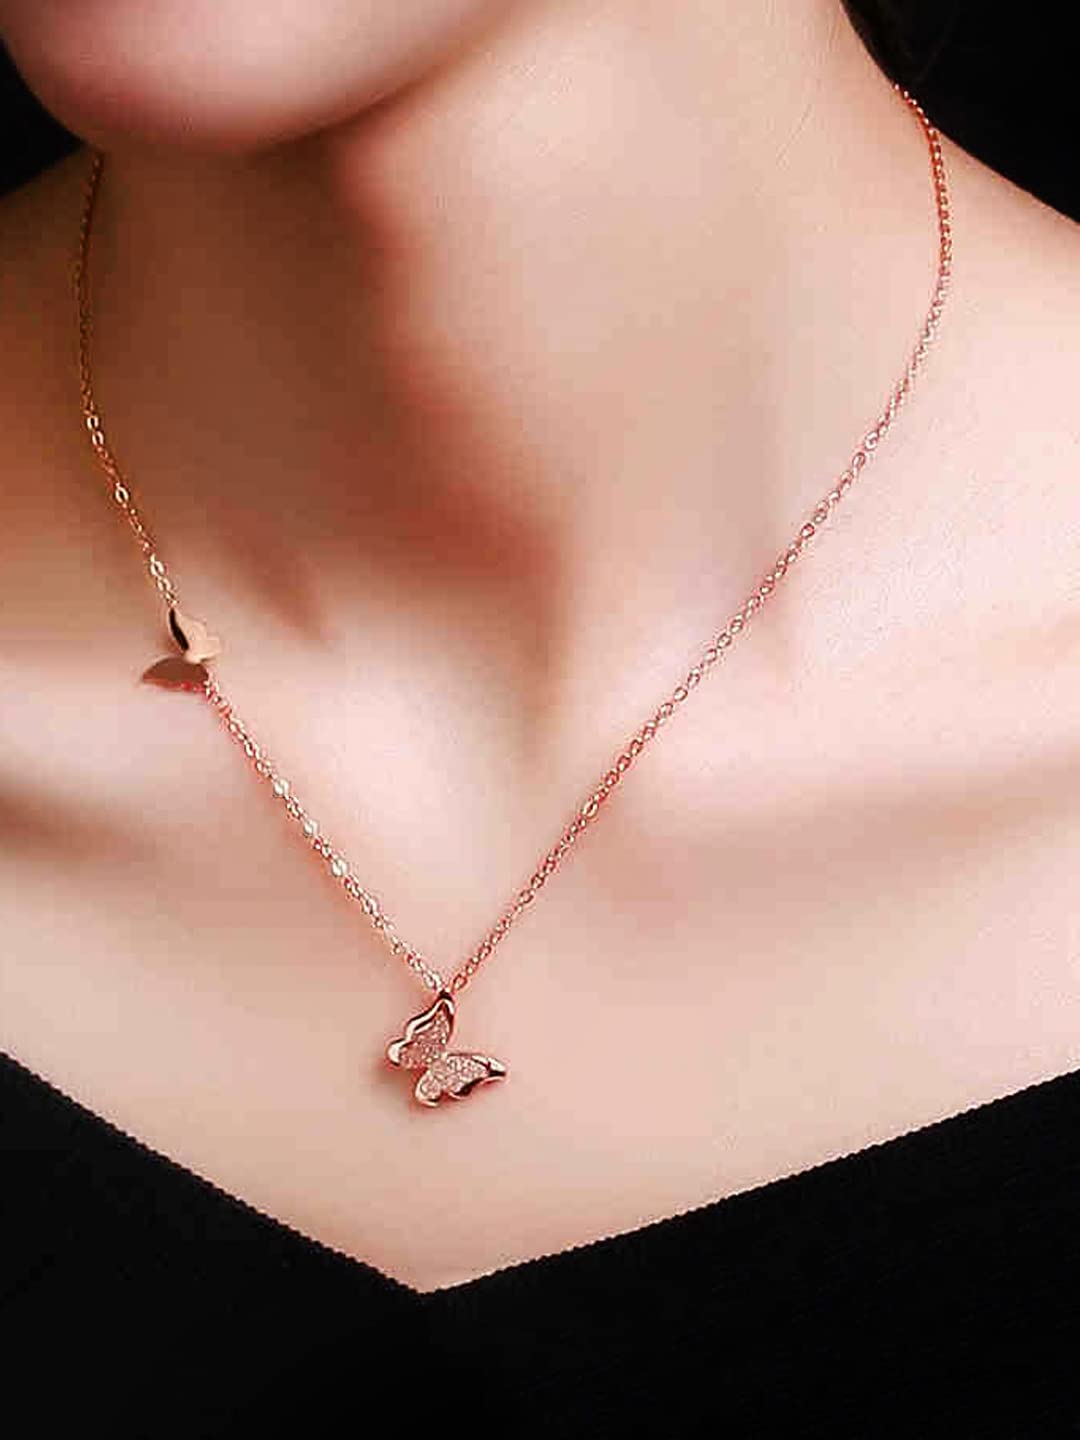 PYR Fashion Stylish Partywear Gold Locket Pendant Necklace Chain For Women  Men Girl Boys Gold-plated Alloy Pendant Set Price in India - Buy PYR  Fashion Stylish Partywear Gold Locket Pendant Necklace Chain